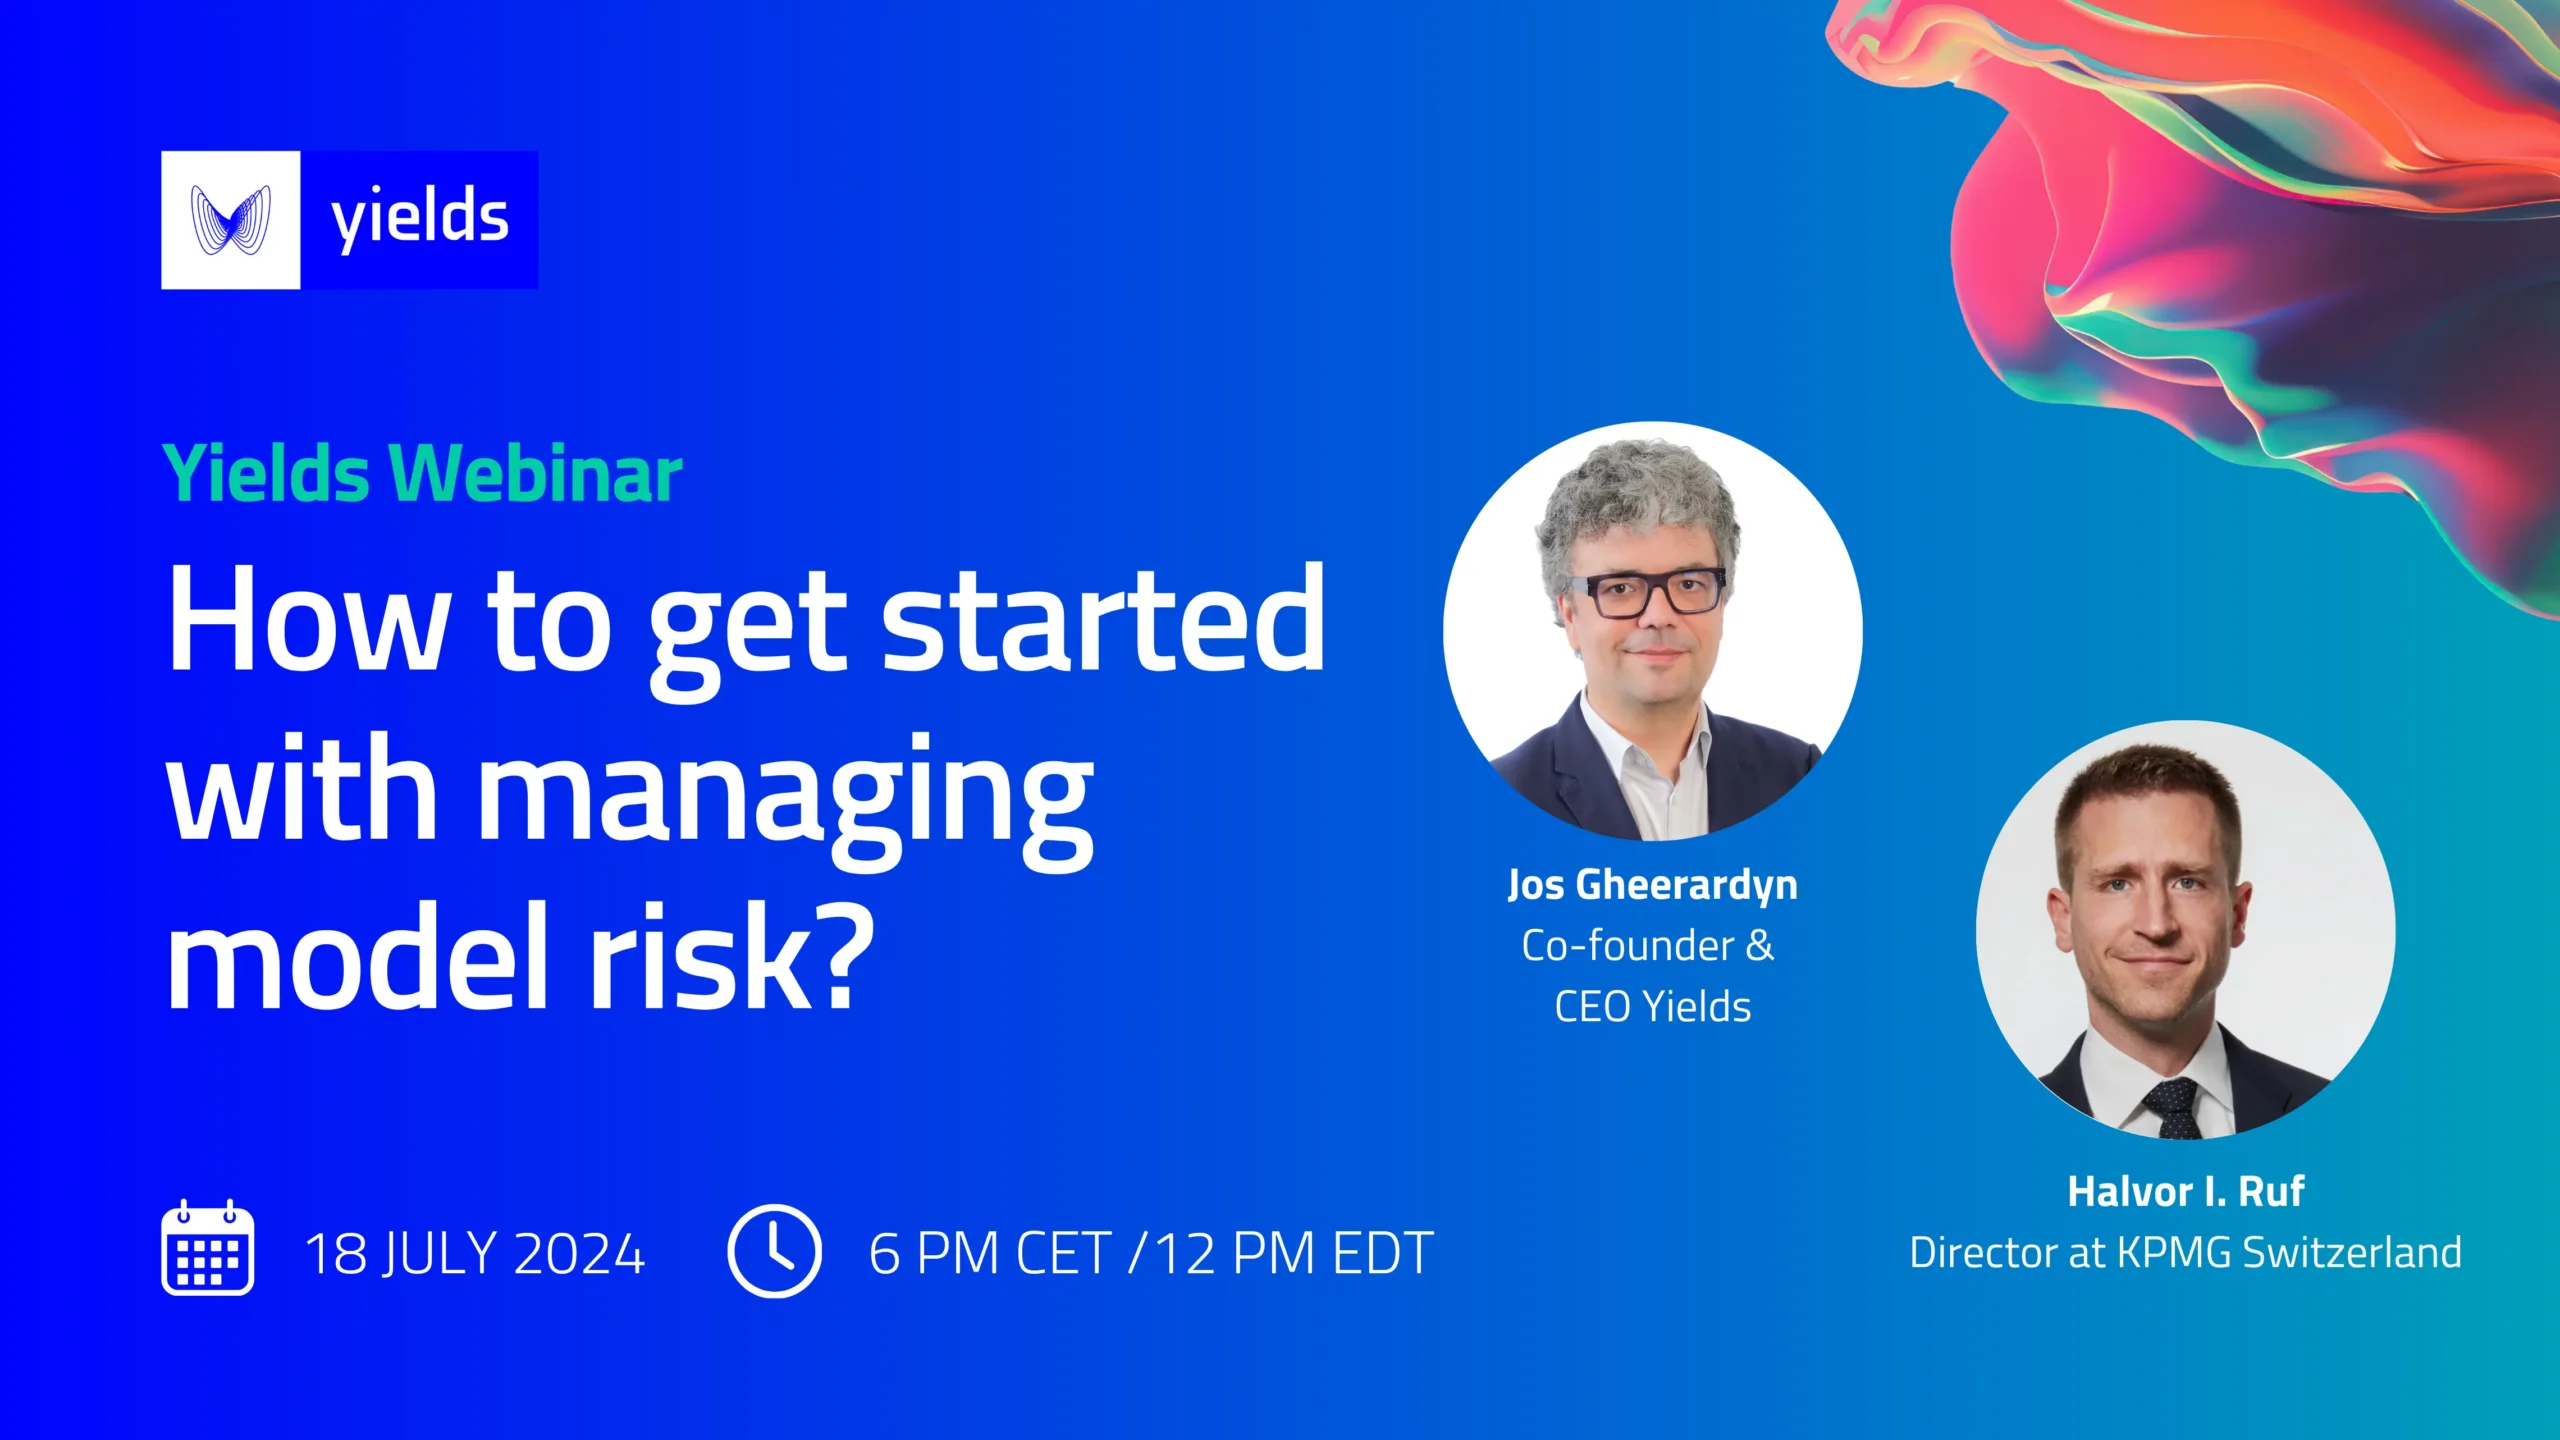 webinar - How to get started with managing model risk?